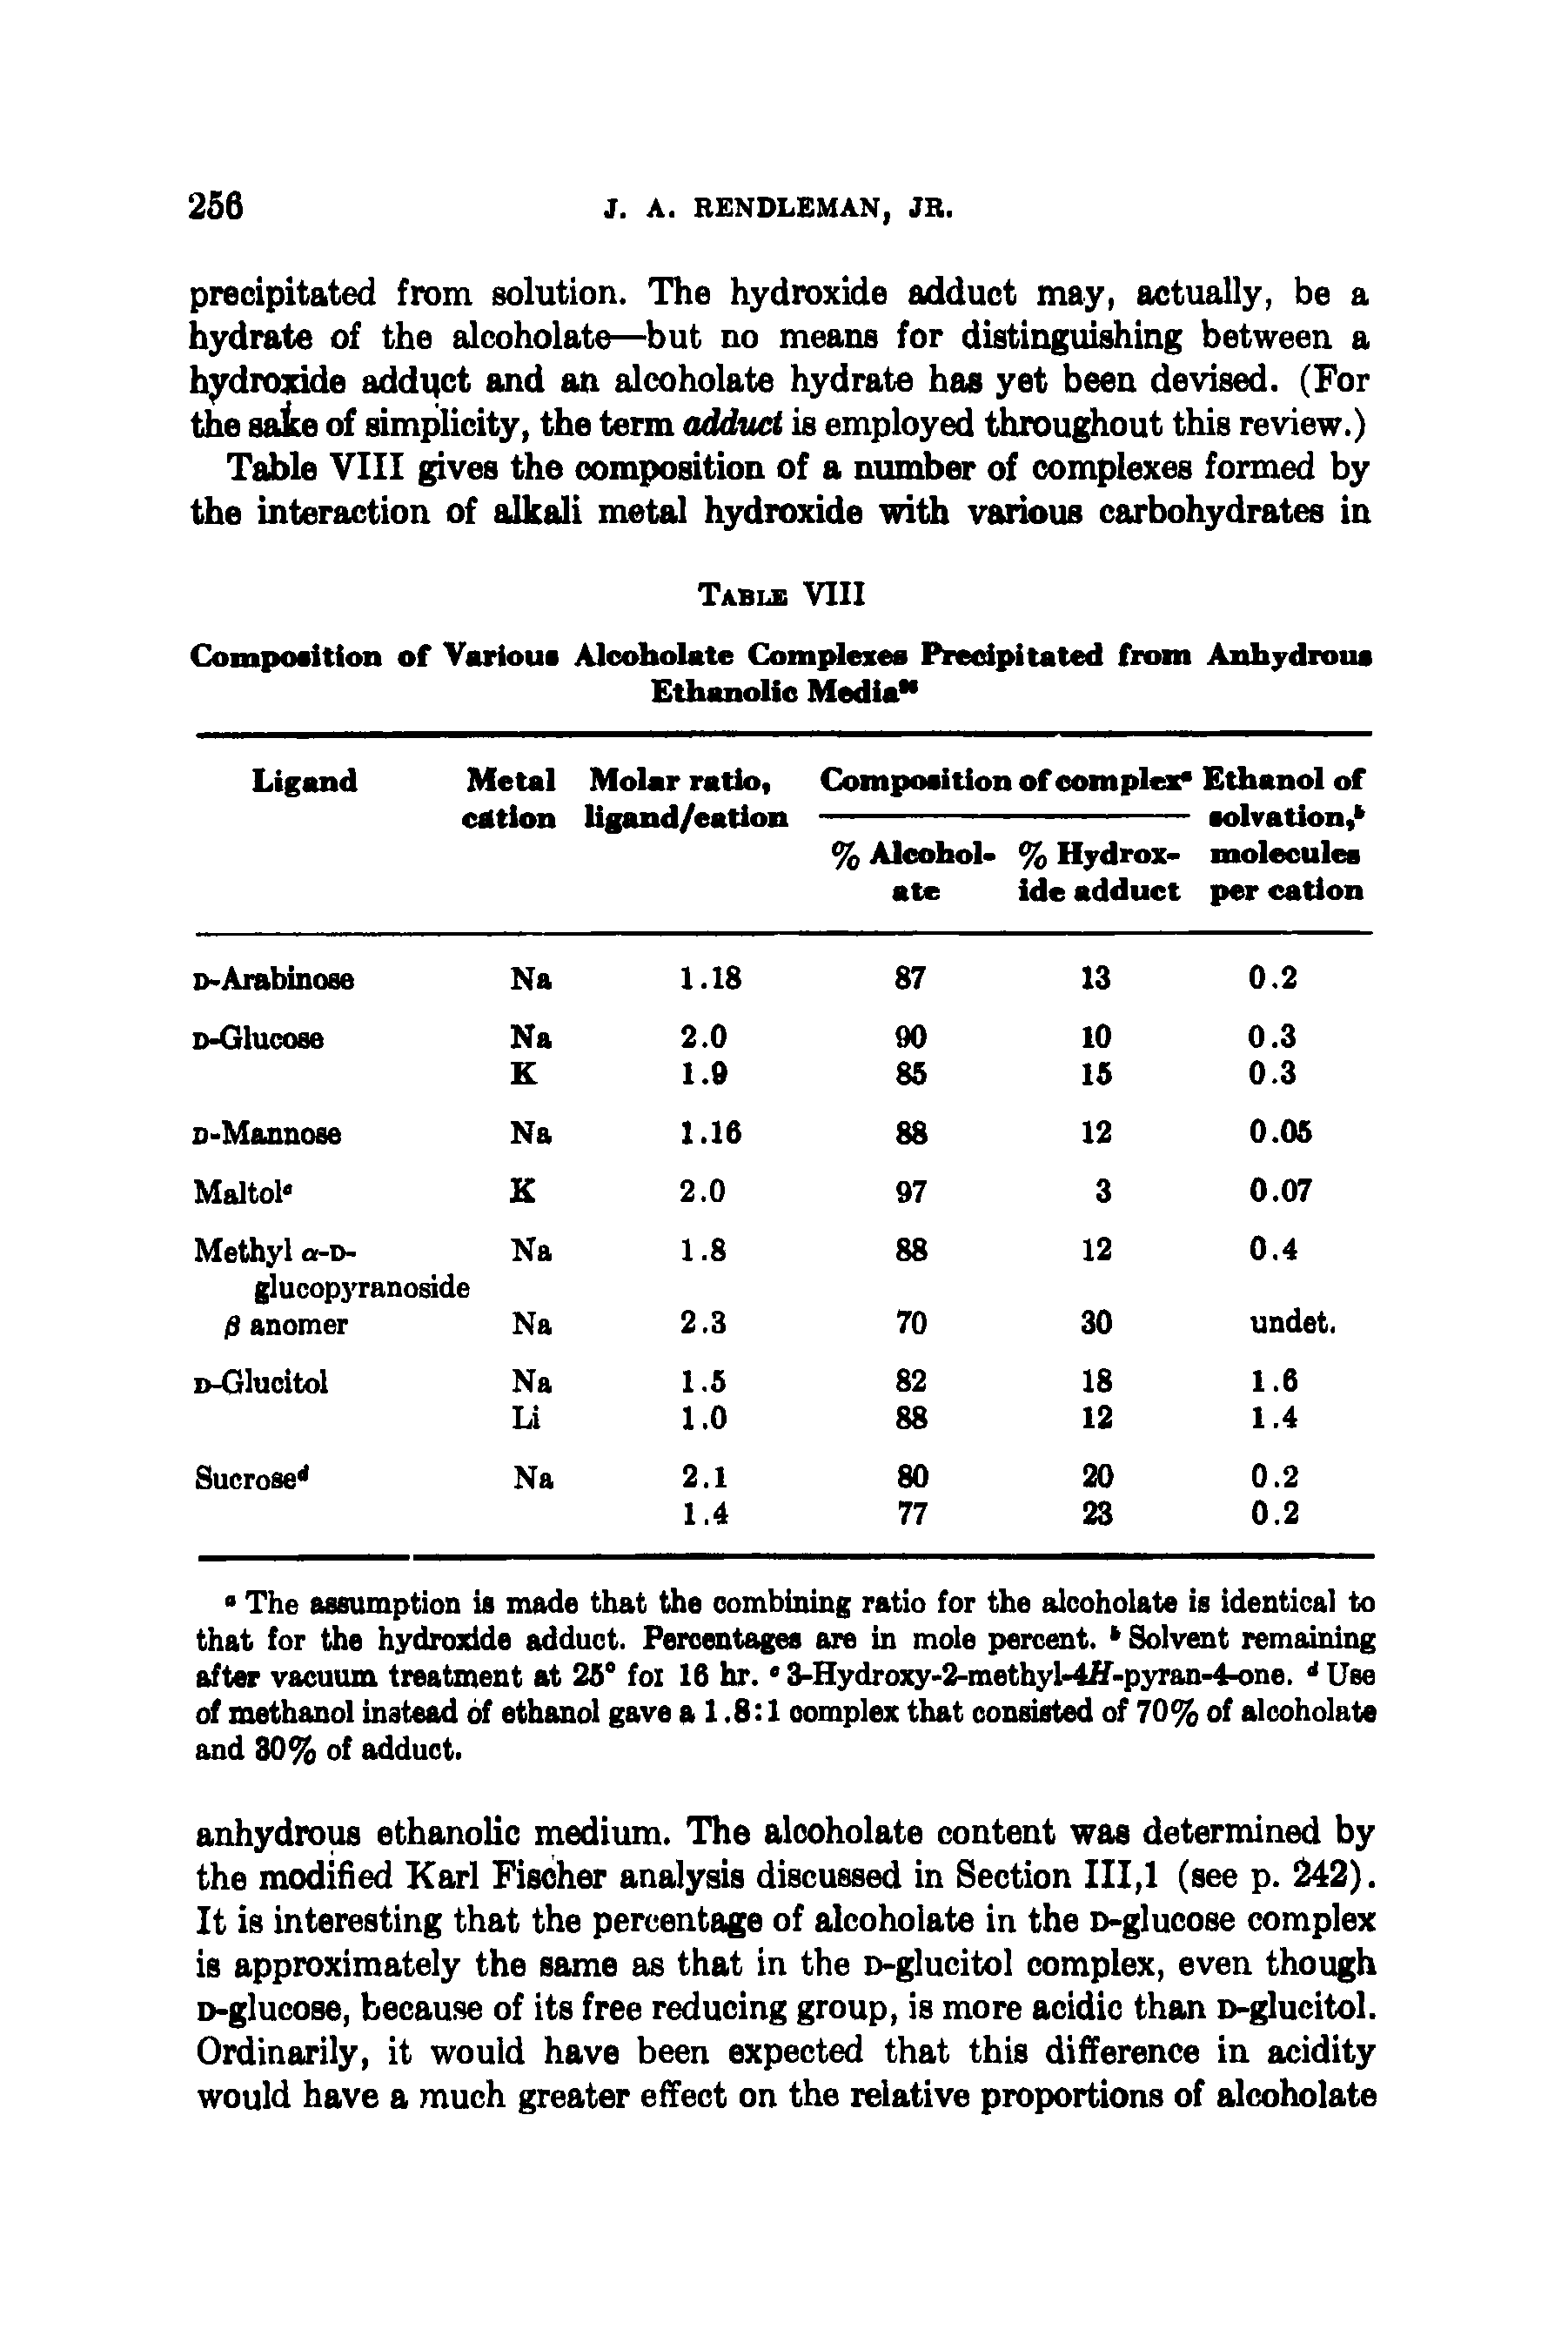 Table VIII gives the composition of a number of complexes formed by the interaction of alkali metal hydroxide with various carbohydrates in...